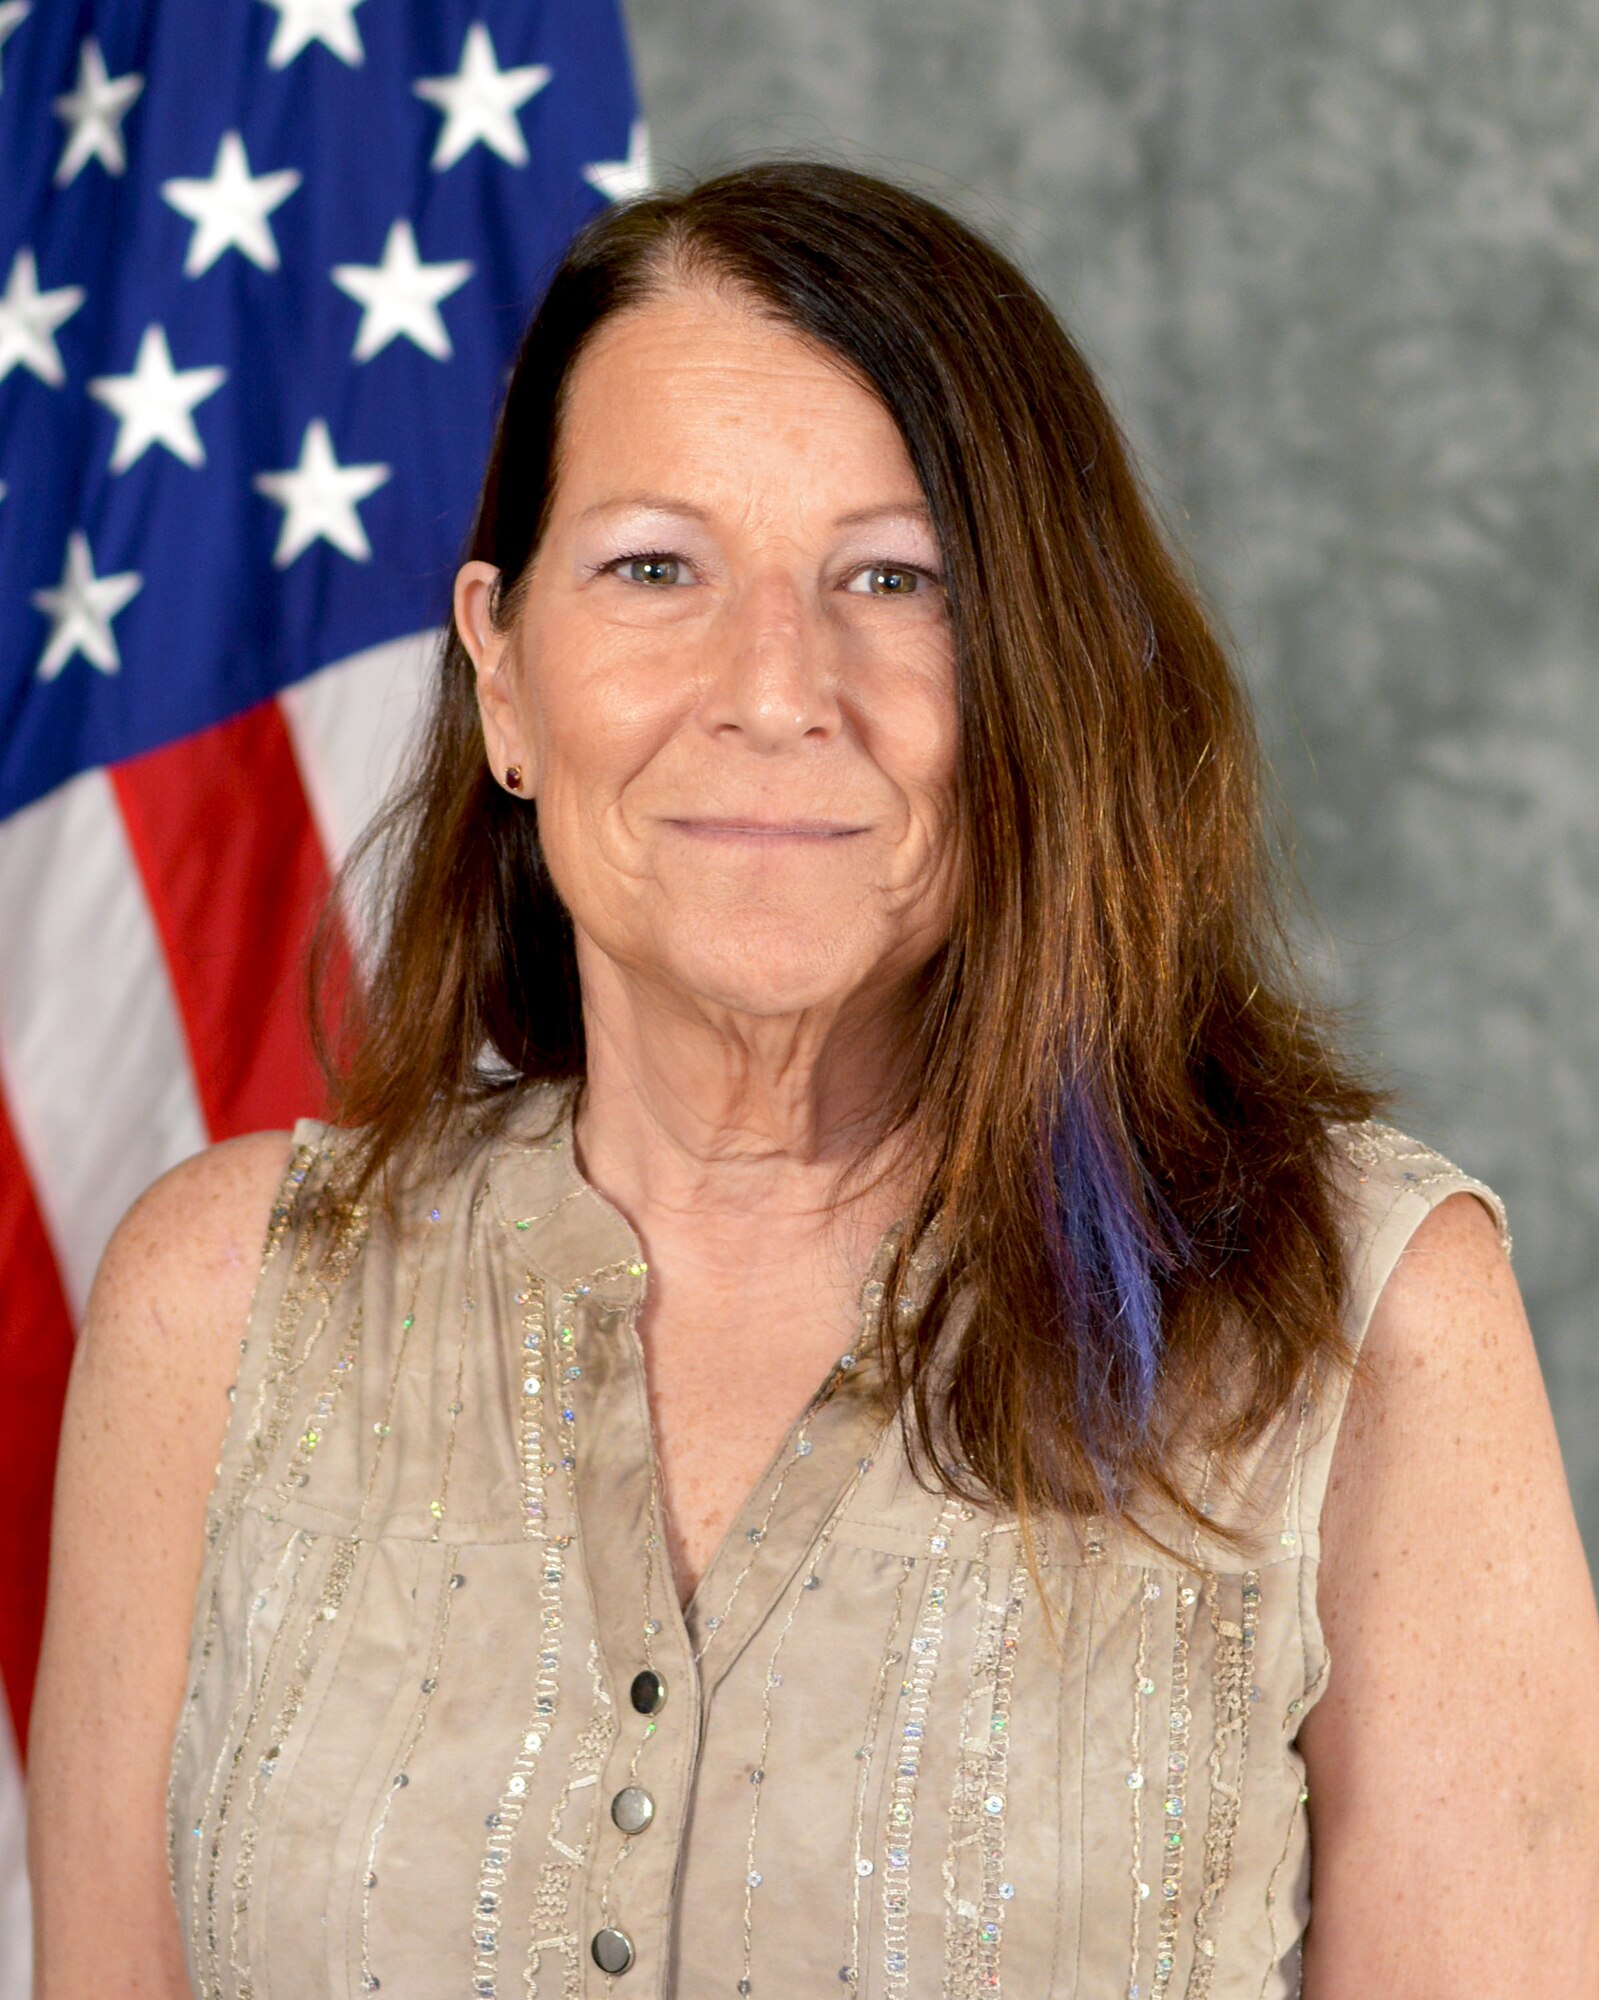 Jacqueline Falkner, 507th Air Refueling Wing Director of Psychological Health, poses for an official photograph May 8, 2018, at Tinker Air Force Base, Oklahoma. Falkner is a civilian employee who is a Licensed Clinical Social Worker who joined the wing in 2014. As the DPH, she works with Reserve members and their families offering counseling services, special programs and referral services aimed at fostering resilience and psychological wellness. The DPH's services are free of charge, private and confidential, with a few exceptions as directed by the Air Force and state law. (U.S. Air Force photo by Tech. Sgt. Samantha Mathison)